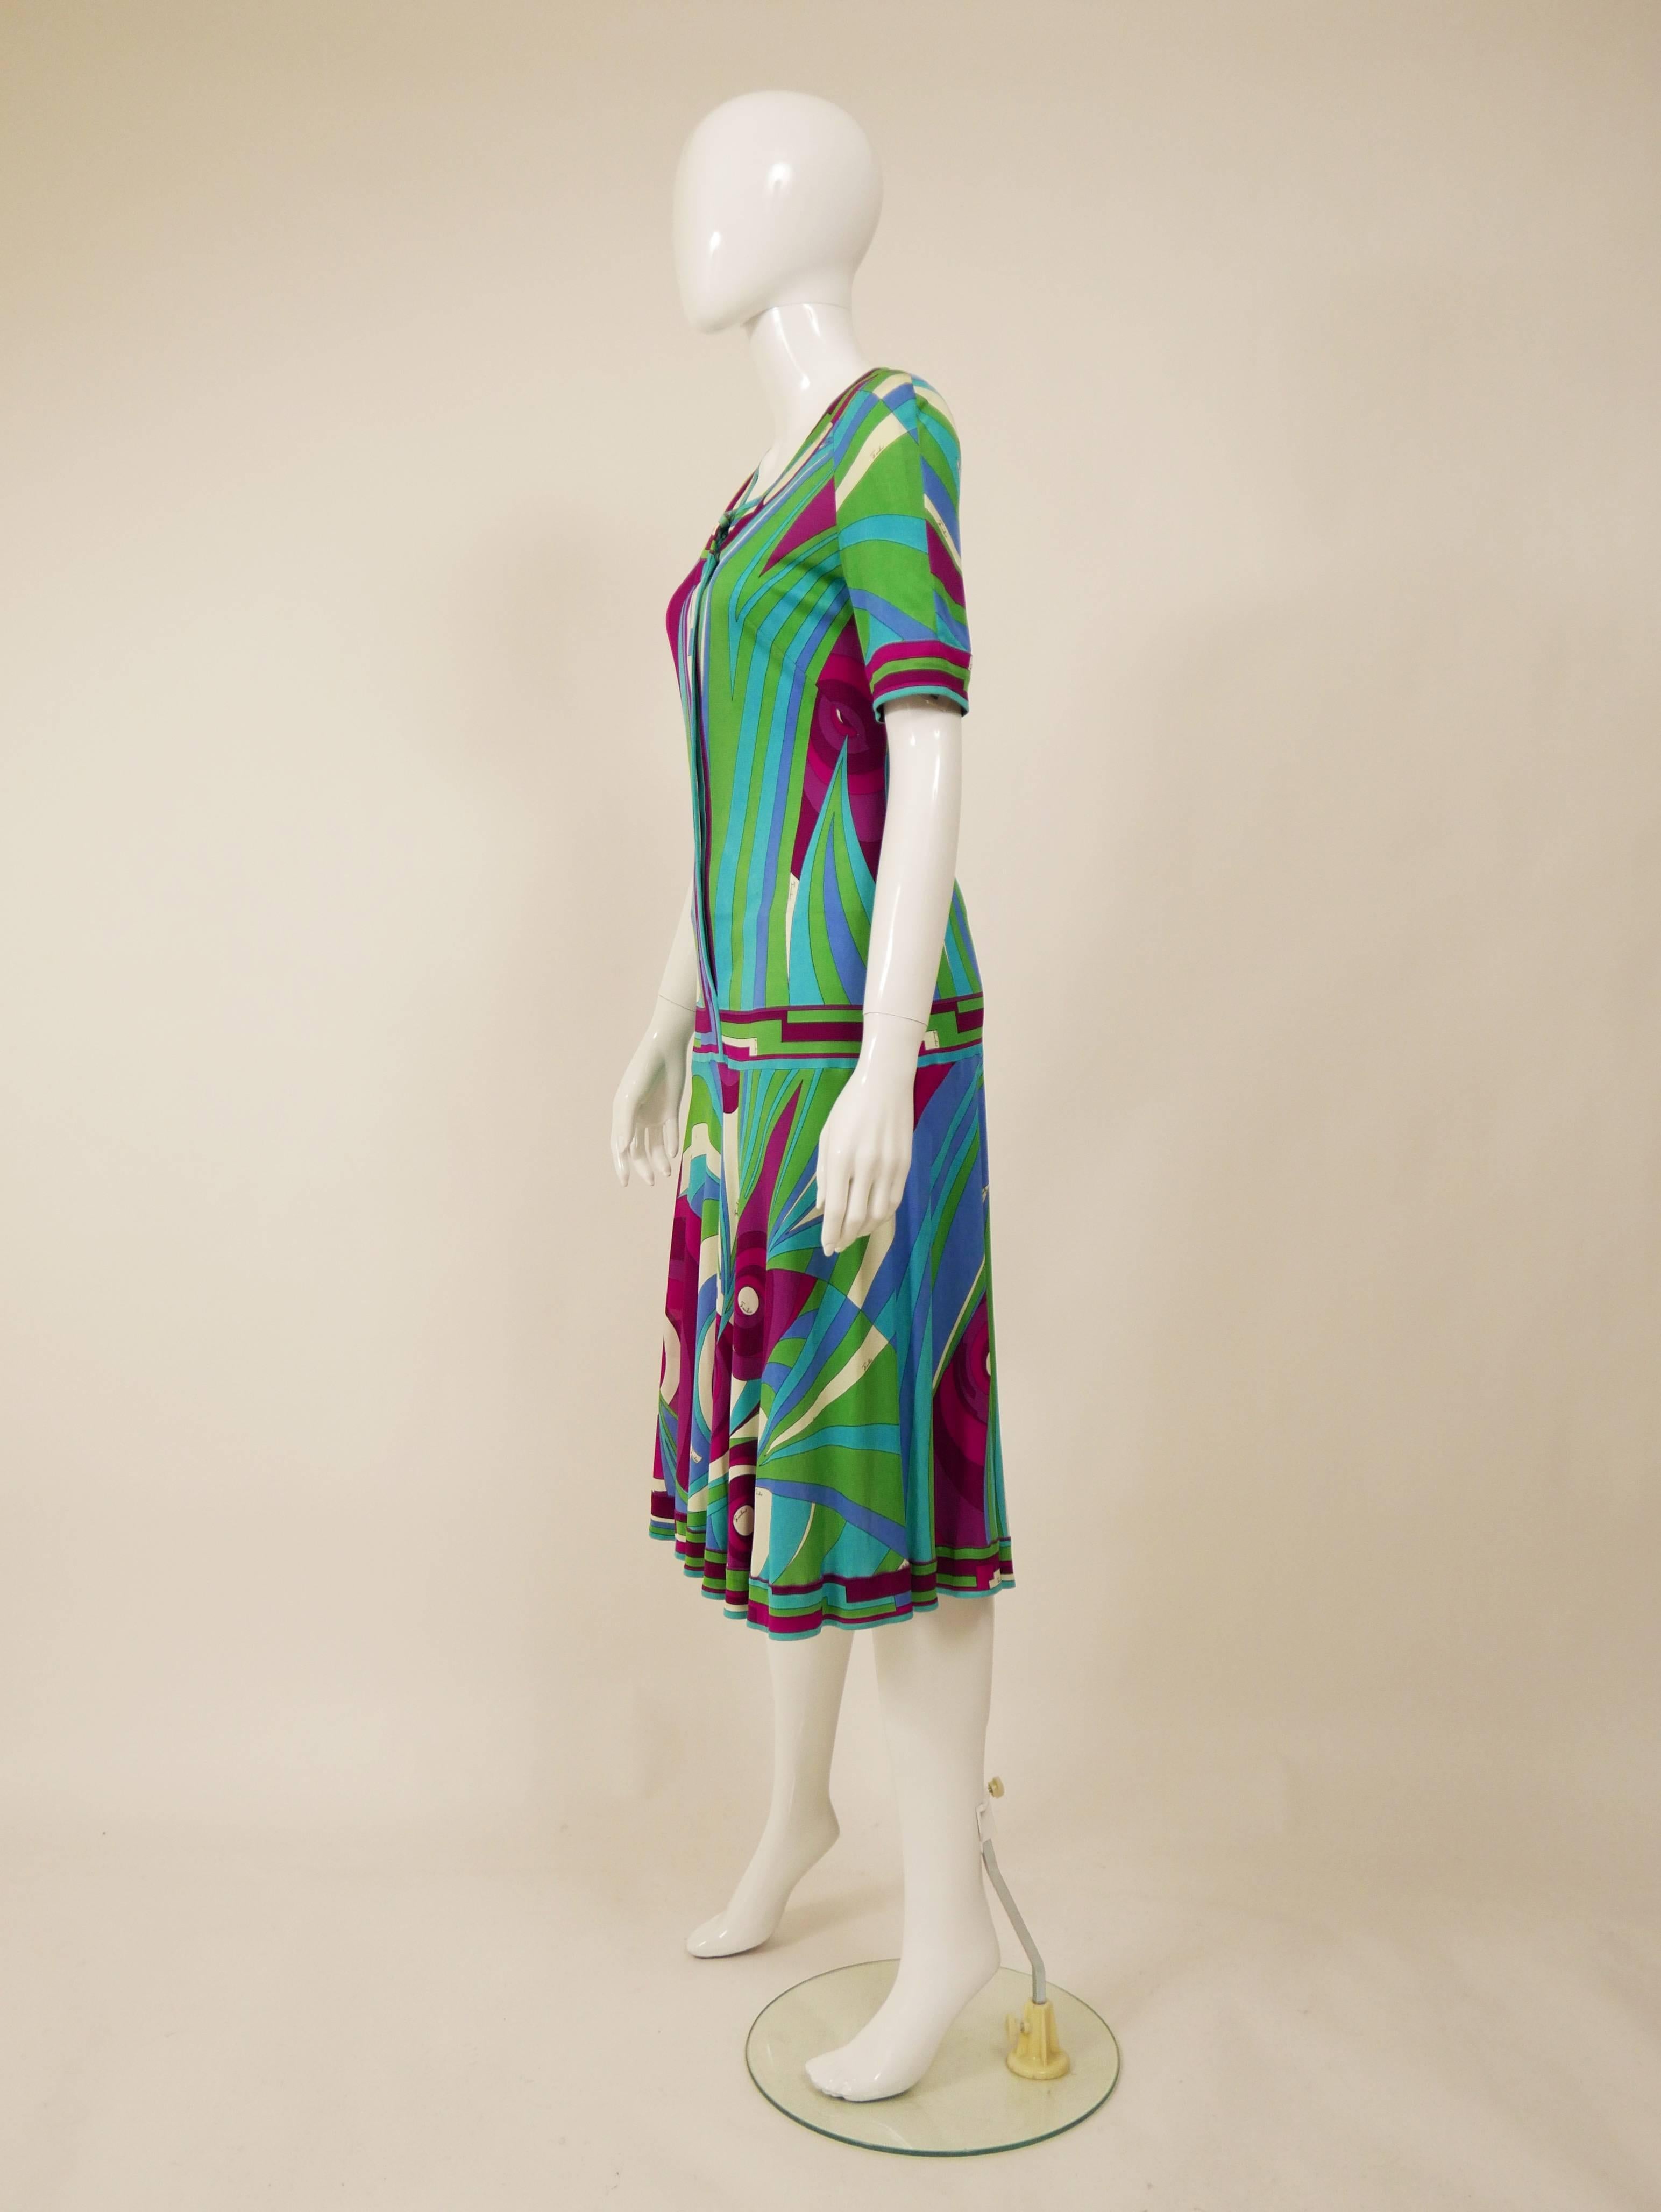 This lovely Emilio Pucci 1970s dress is in a colourful silk jersey with typical exotic and colorful Pucci abstract print with signed Emilio fabric. It has round neckline, short sleeves, low waist and zip closure at the front.

Good vintage